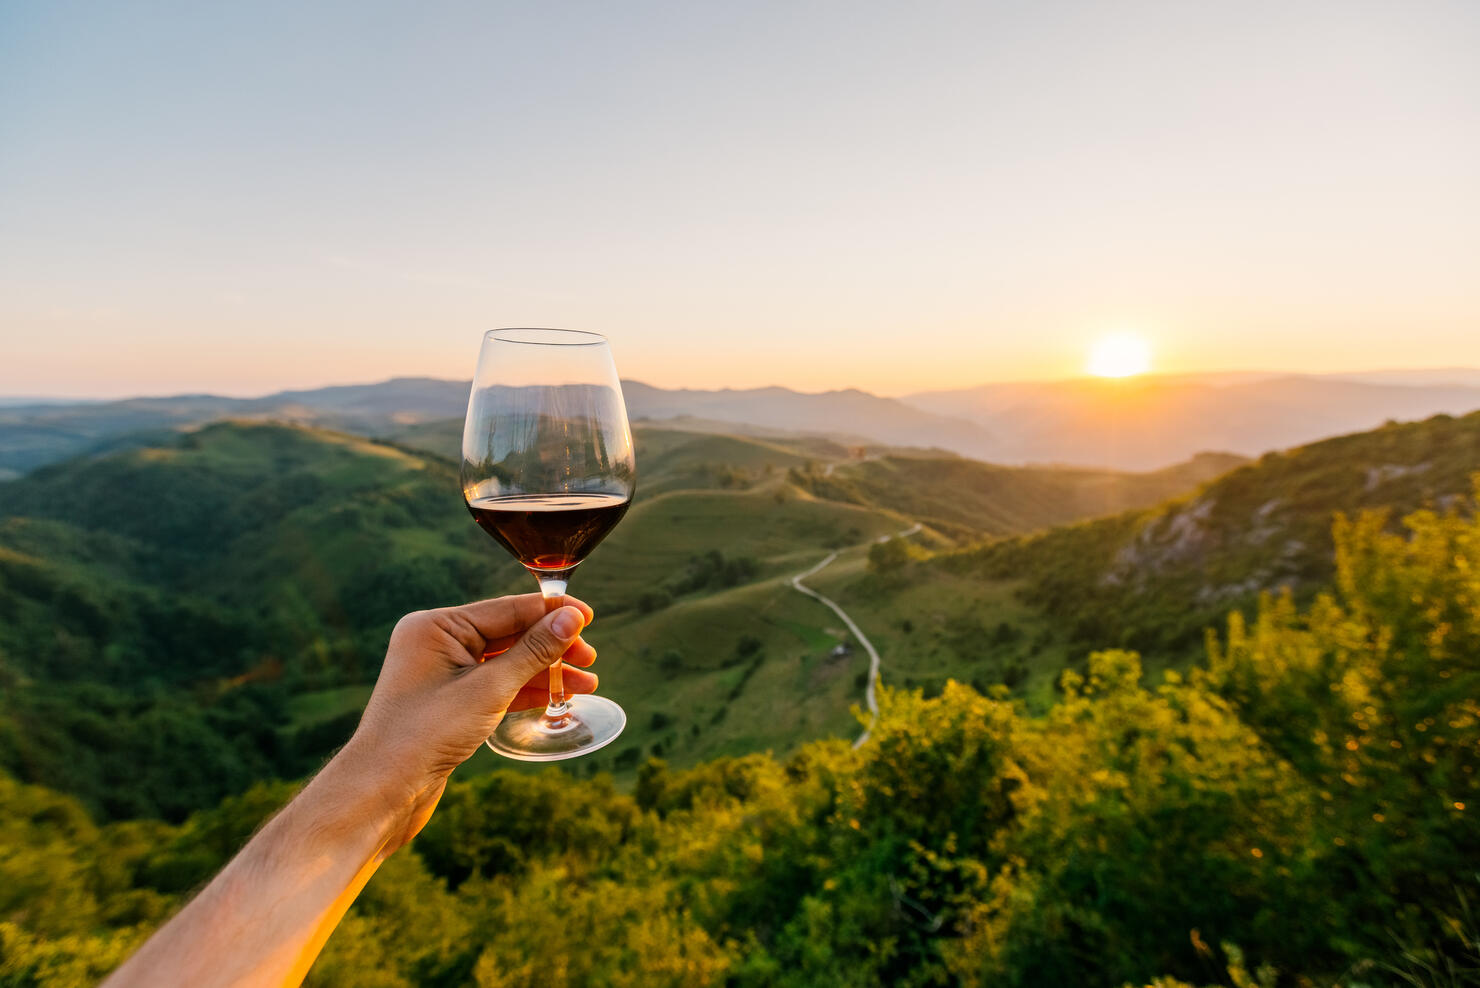 Man holding a glass of red wine surrounded by hills and mountains at sunset, personal perspective POV